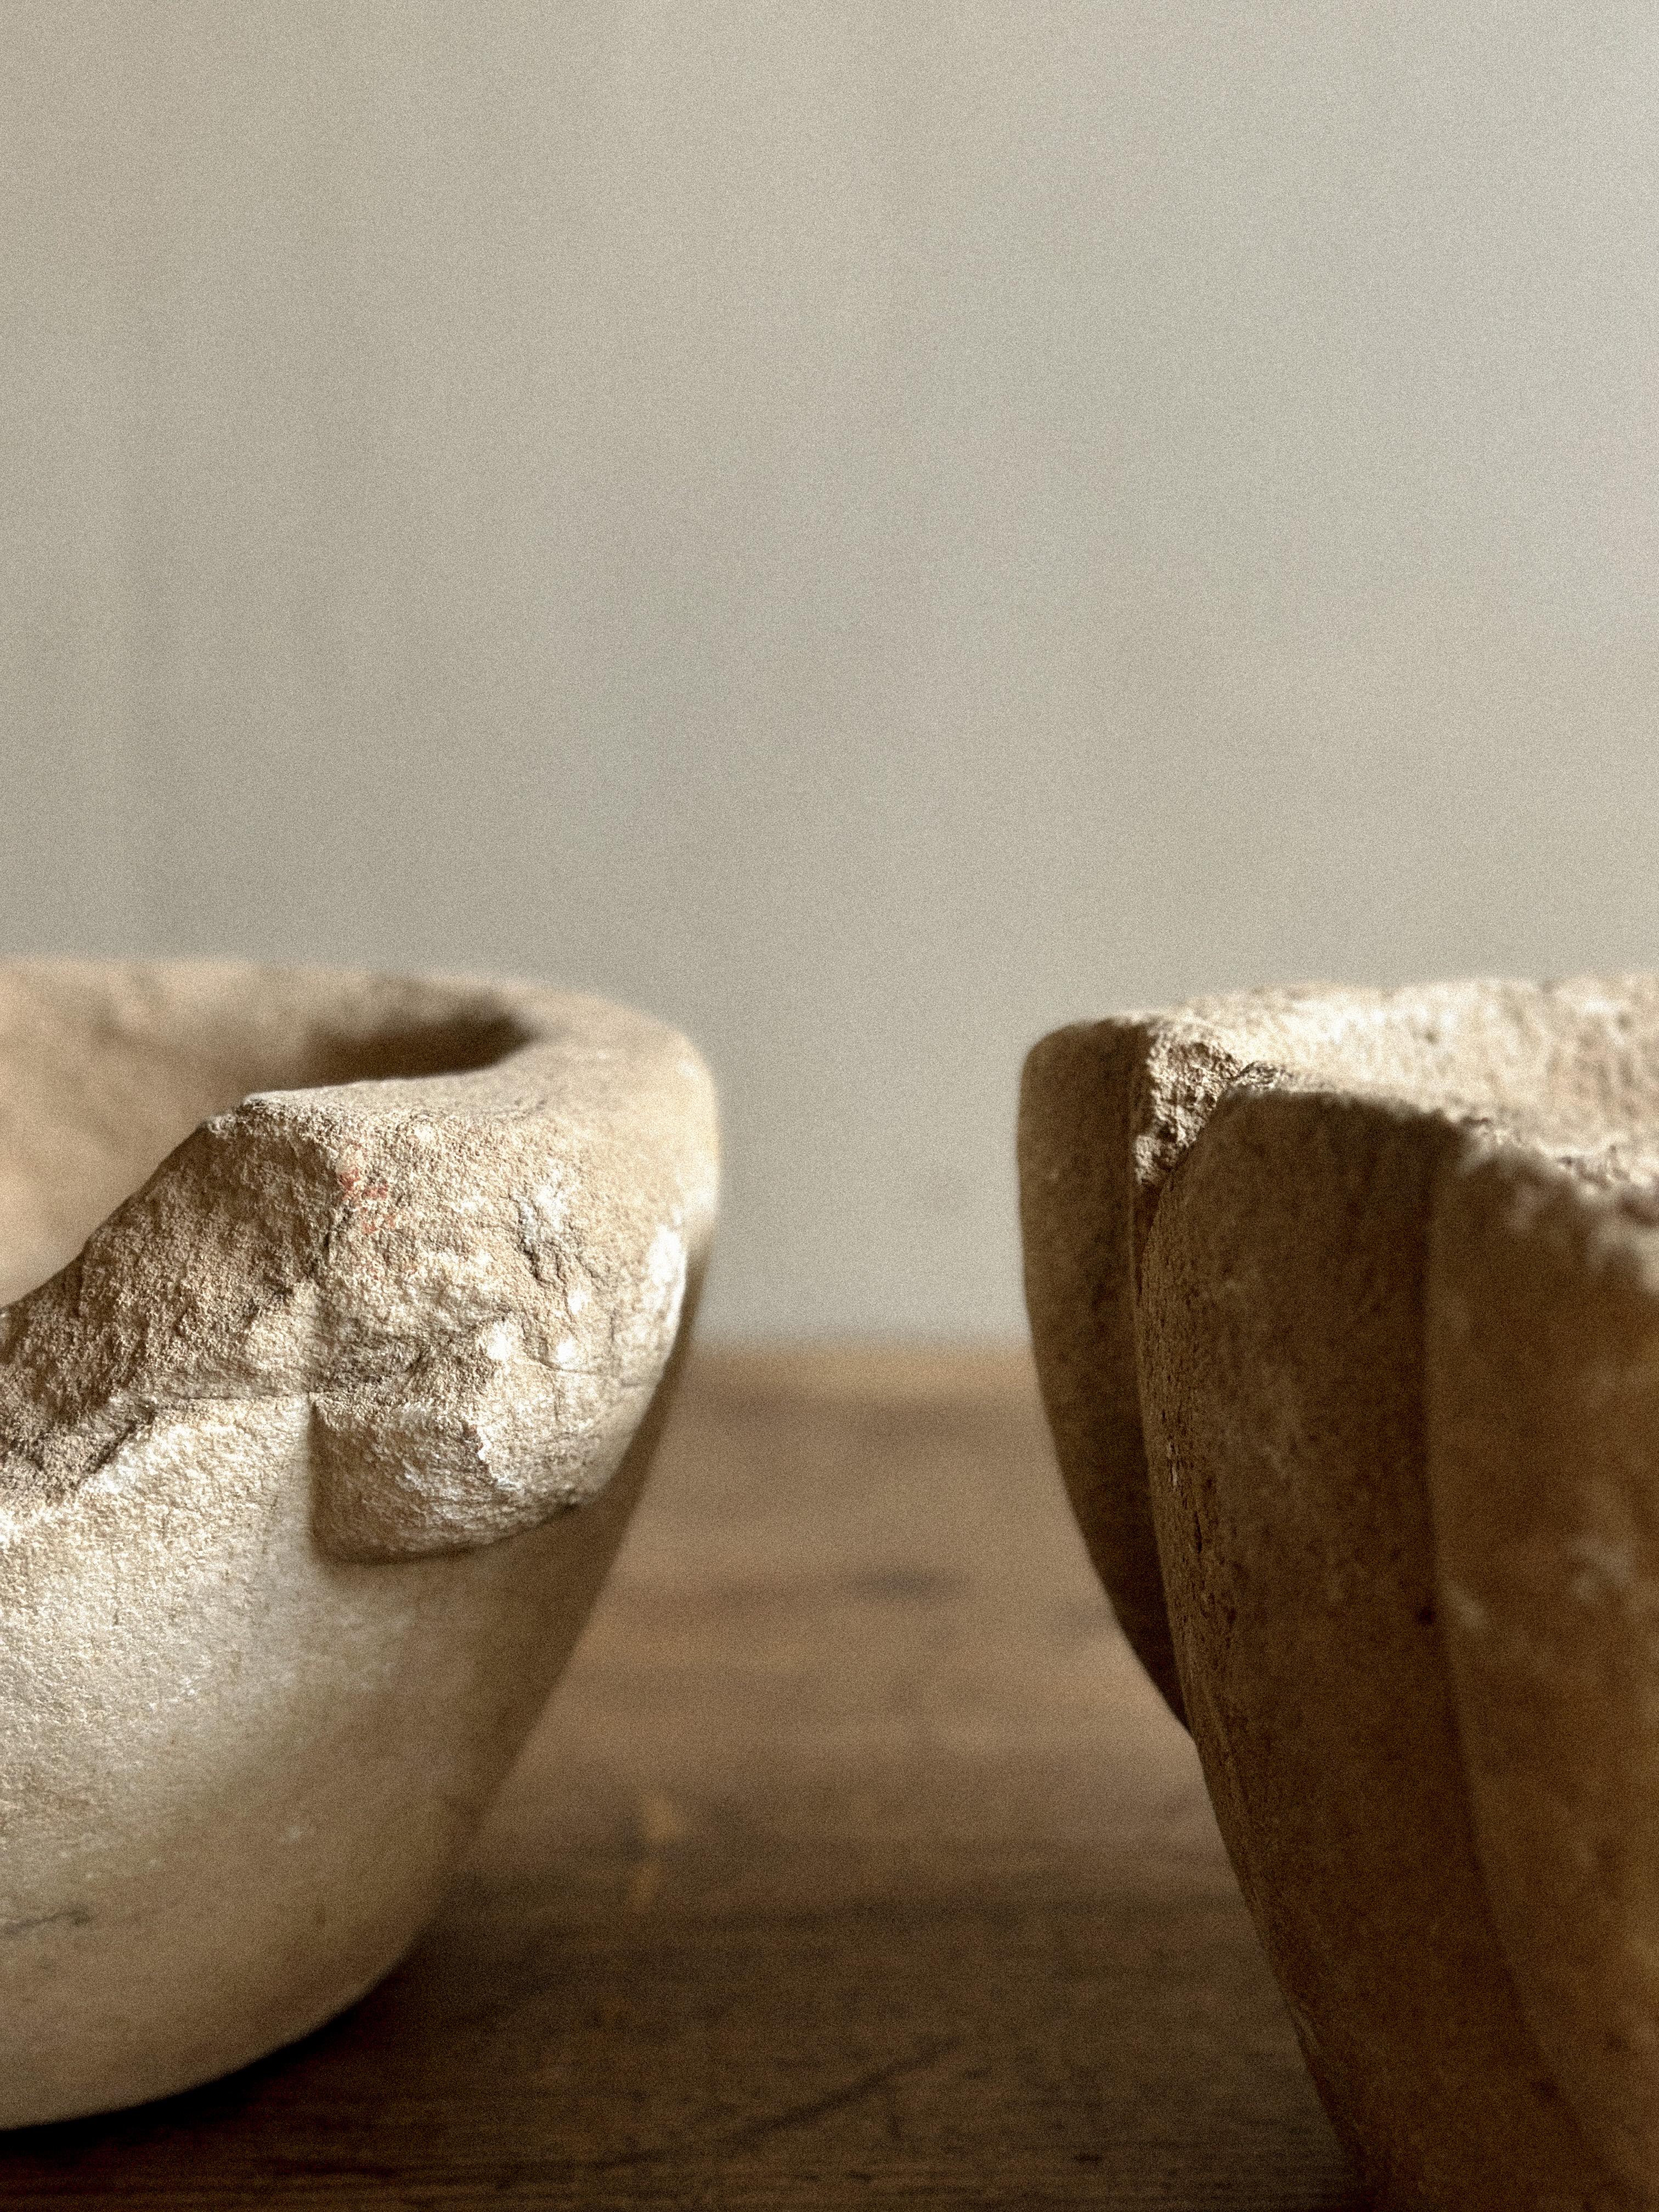 A Duo of Primitive Wabi Sabi Hand-Carved Stone Mortars, Spain, Early 1900s For Sale 4